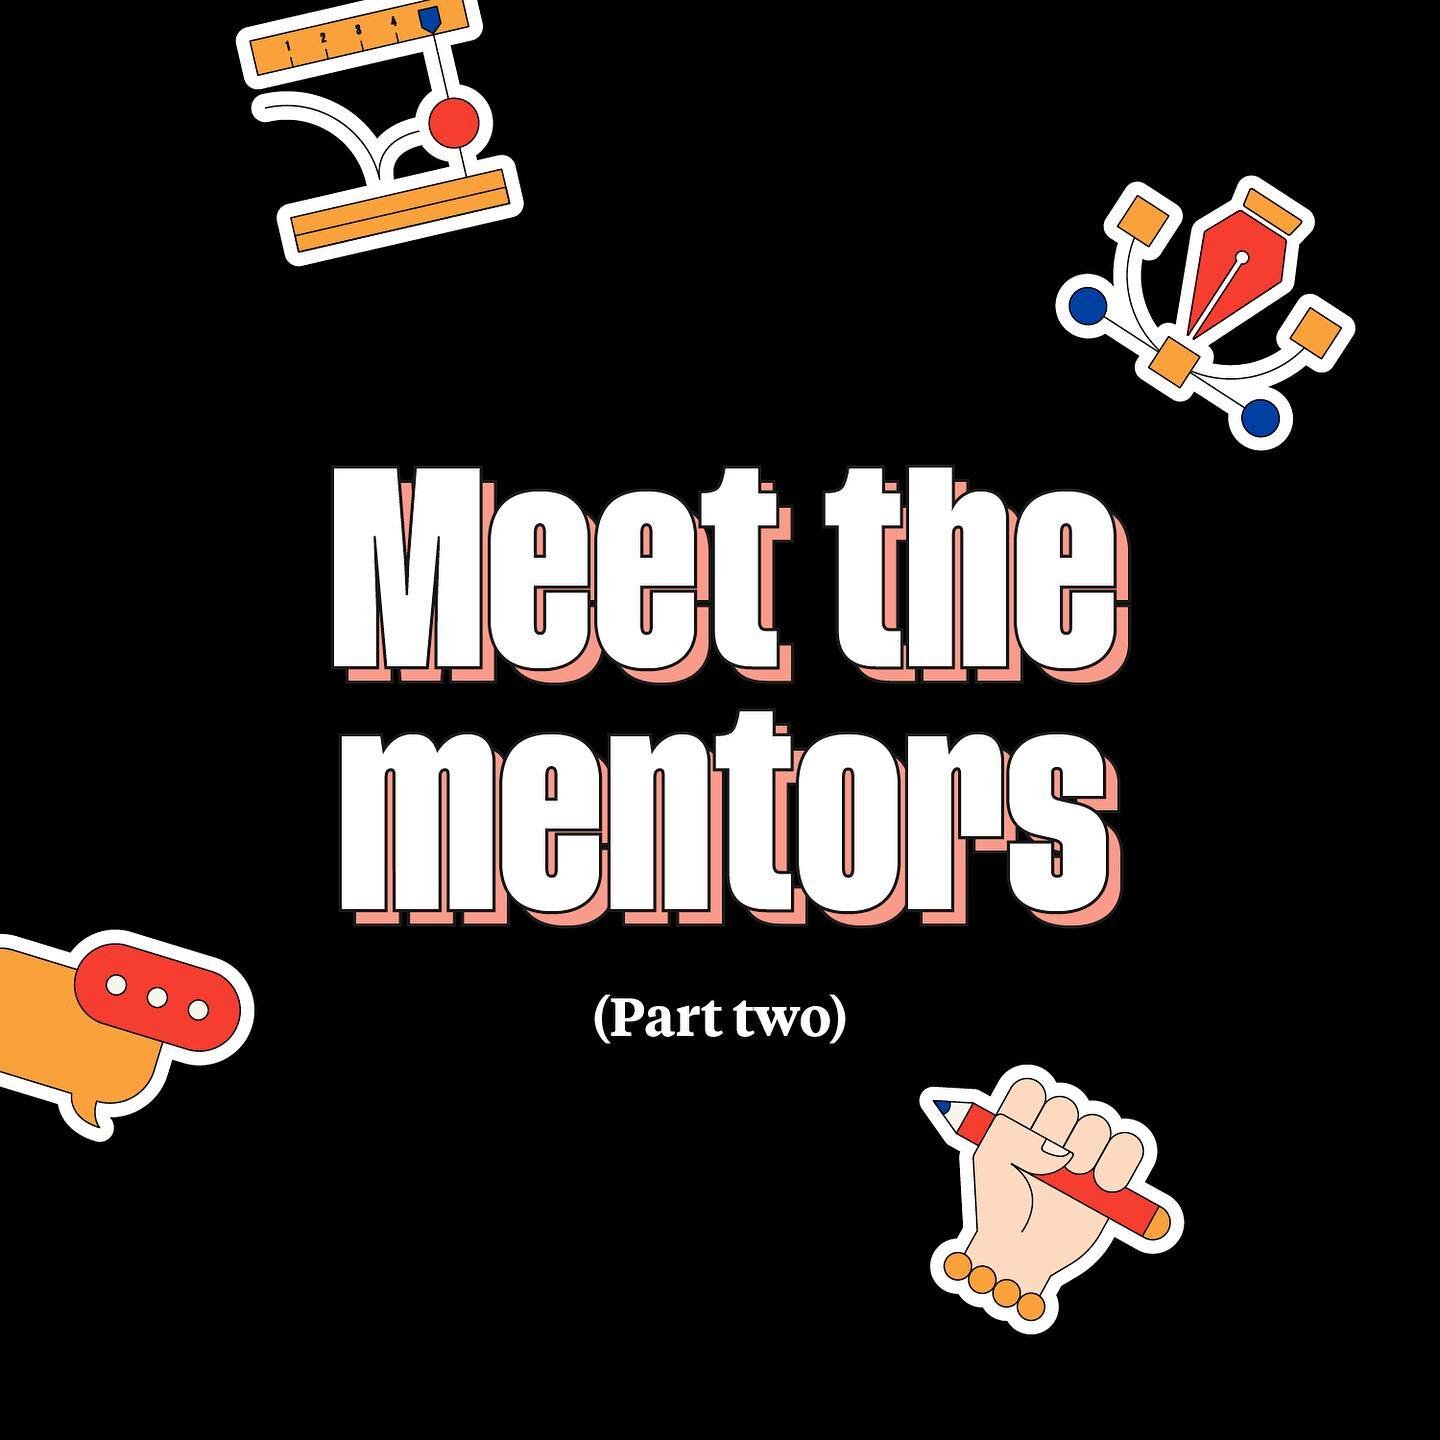 Mentoring superheroes 🚀 Part 2! Swipe through to meet the other 14 fantastic folk that complete our lineup of mentors for The Arena mentoring scheme 4.0 !! For more deets on these peeps, the opportunity and the application, head to our website 💻

?